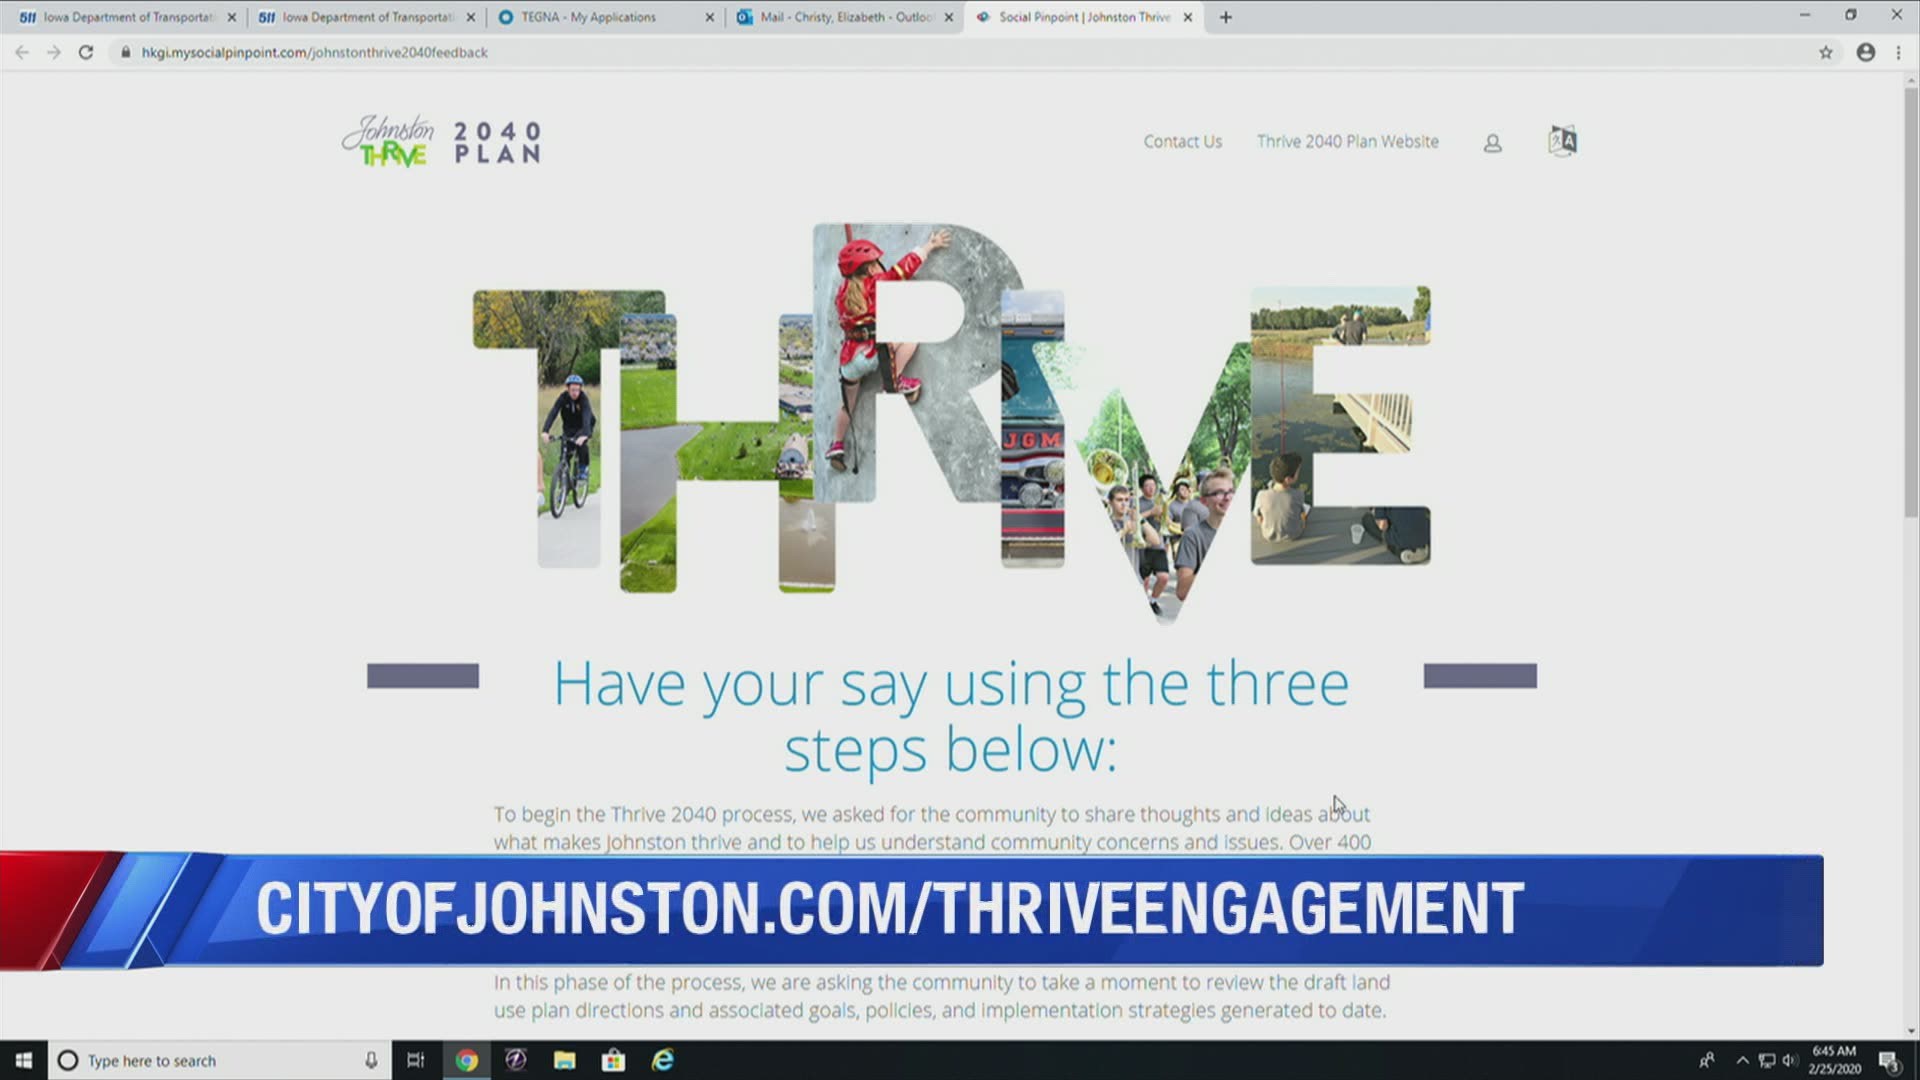 The city of Johnston is calling on its residents to share their thoughts and ideas about what makes Johnston thrive, as well as their concerns.